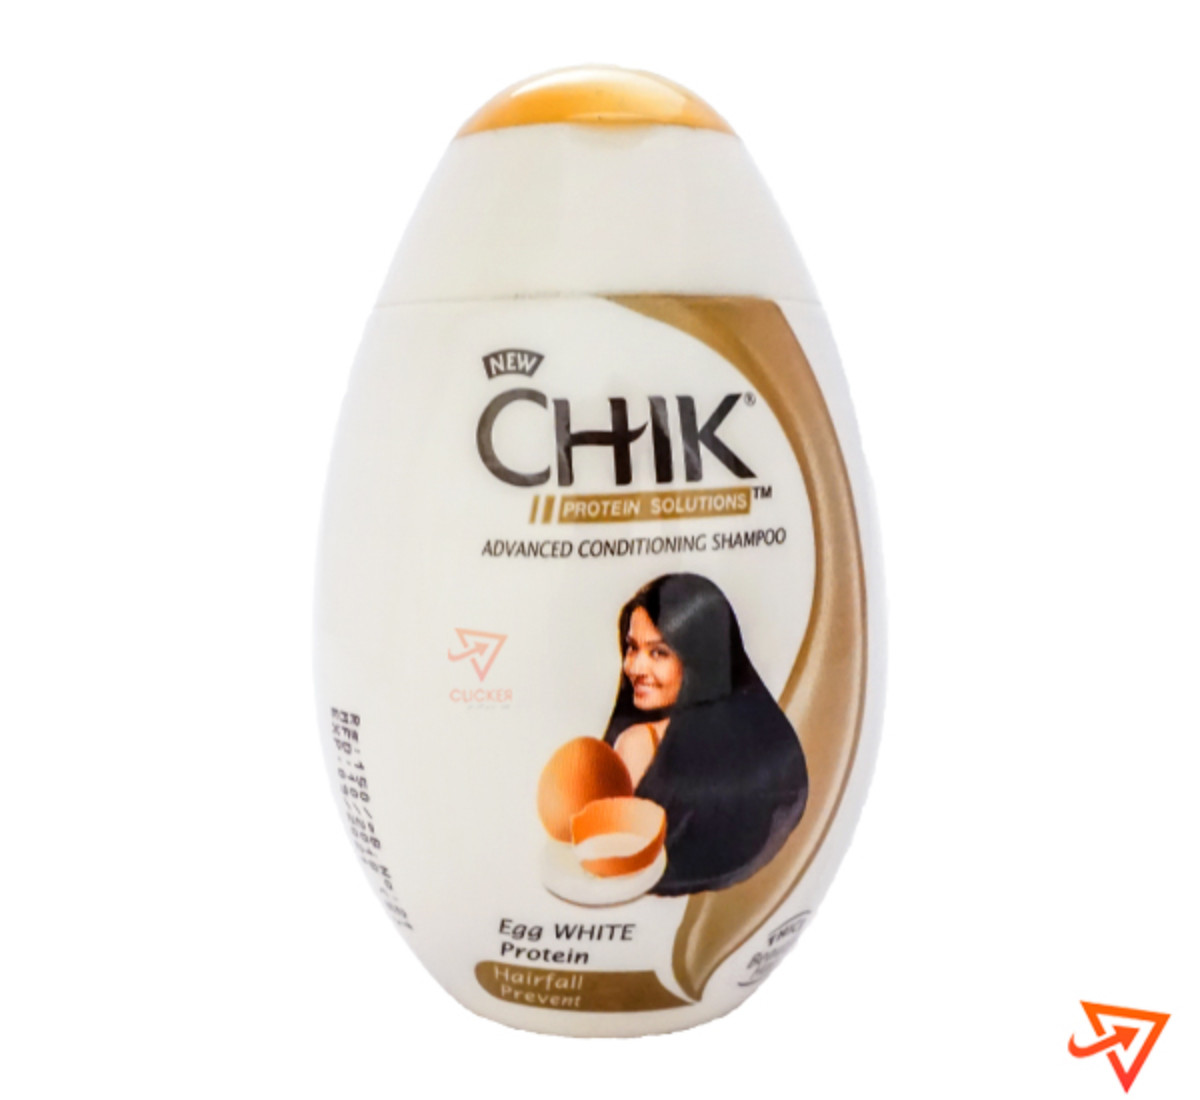 Clicker product 80ml CHIK shampoo with egg white protein,hairfall prevent 1086